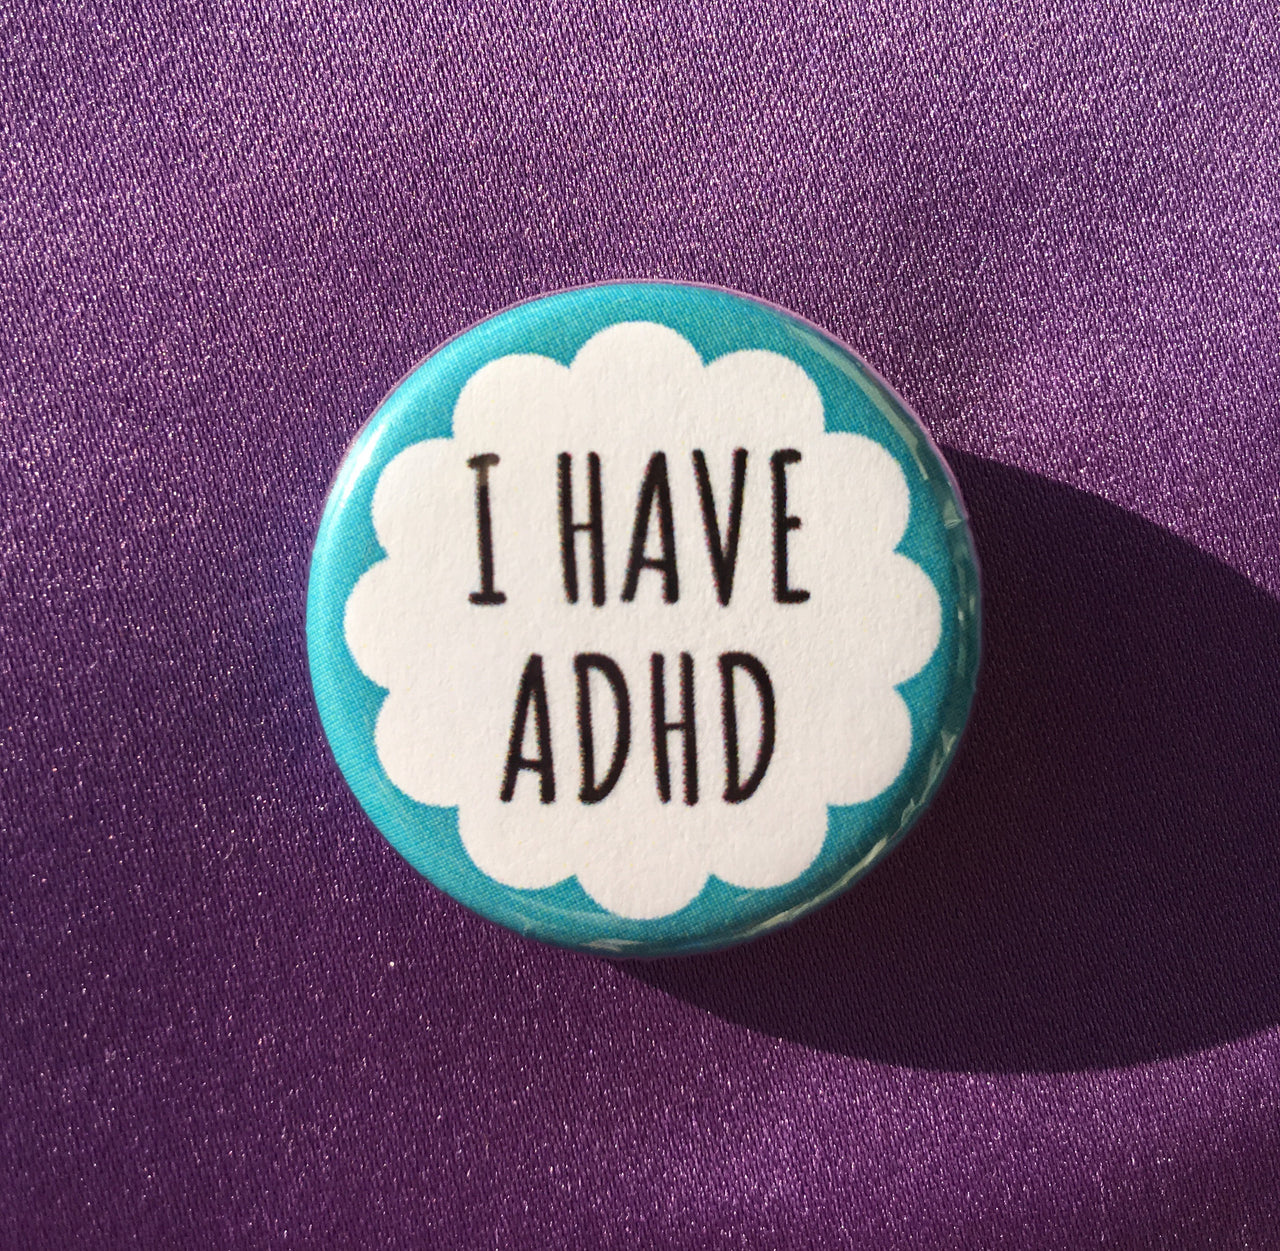 I have ADHD - Radical Buttons